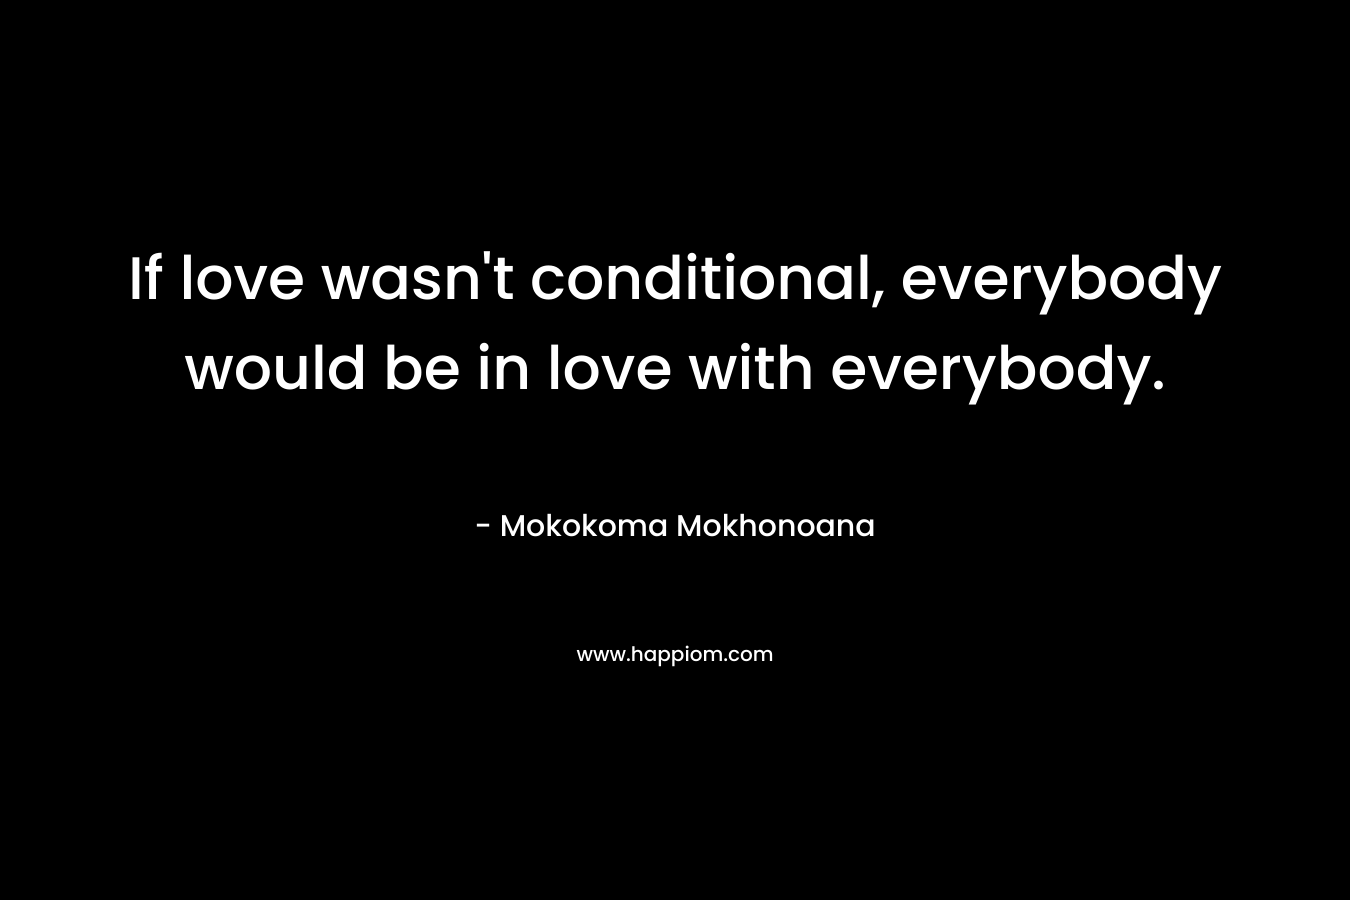 If love wasn’t conditional, everybody would be in love with everybody. – Mokokoma Mokhonoana